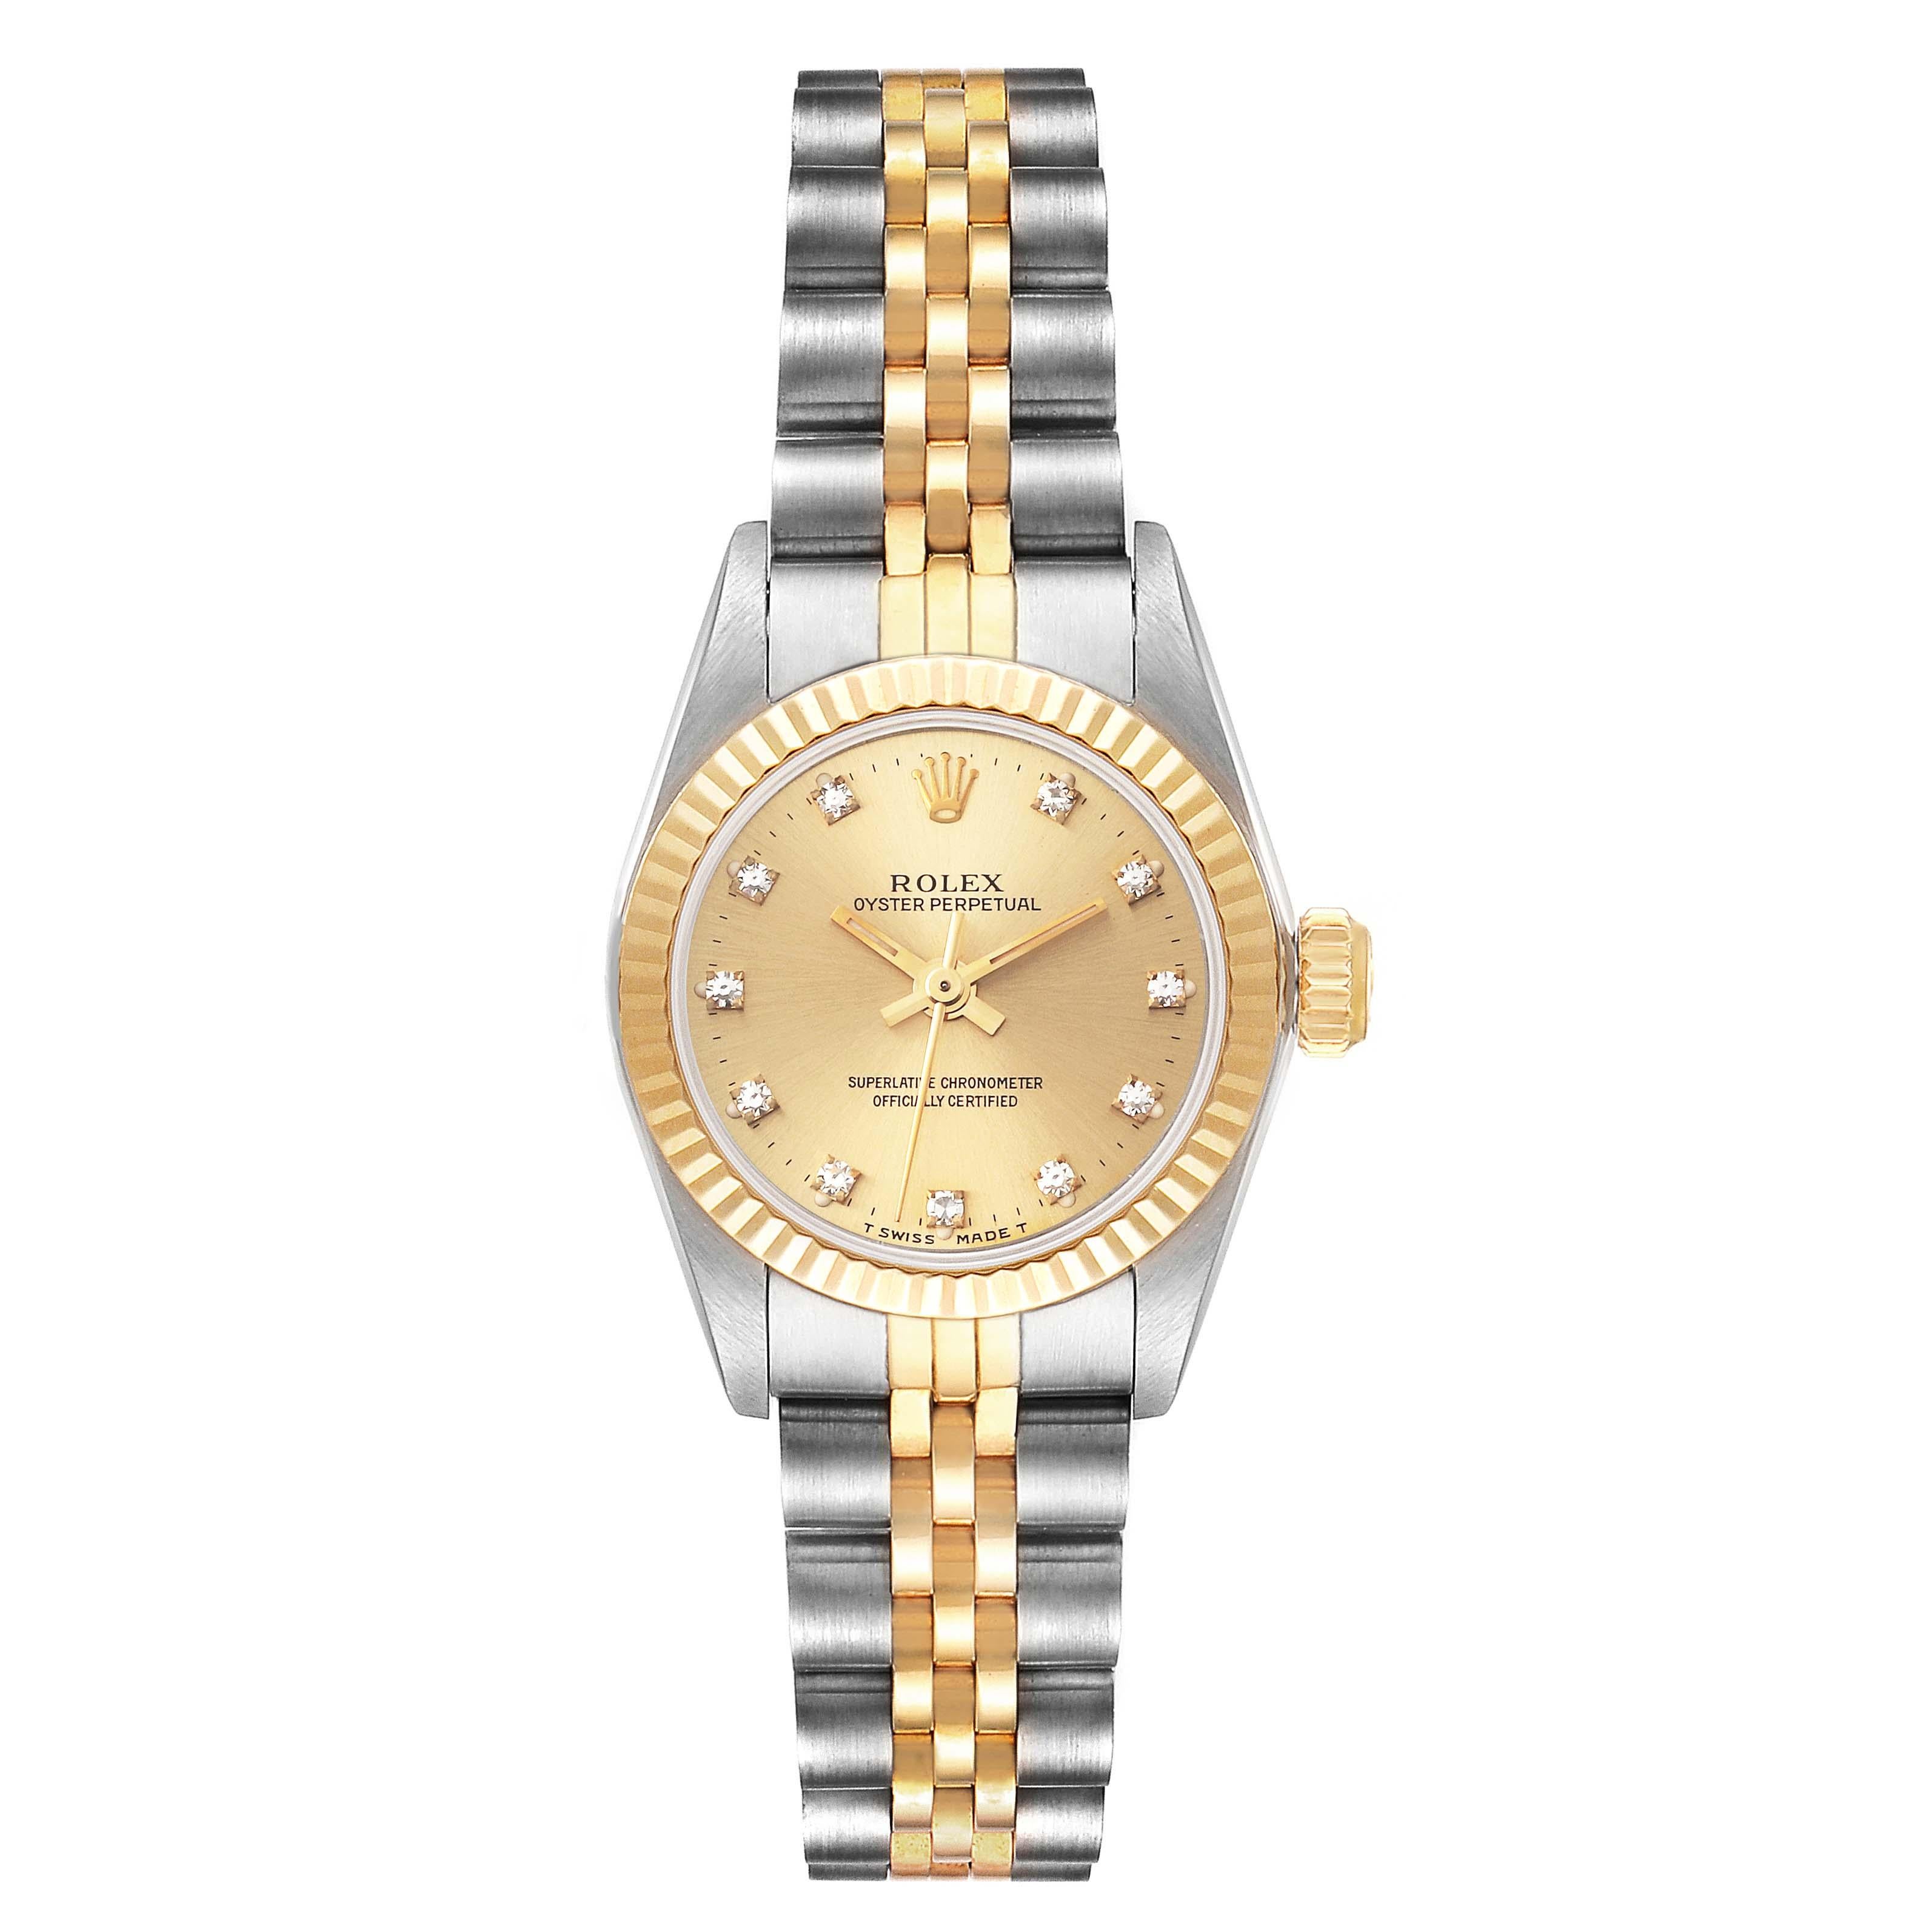 Rolex Oyster Perpetual Steel Yellow Gold Diamond Dial Ladies Watch 67193 Papers. Officially certified chronometer automatic self-winding movement. Stainless steel oyster case 24.0 mm in diameter. Rolex logo on an 18k yellow gold crown. 18k yellow